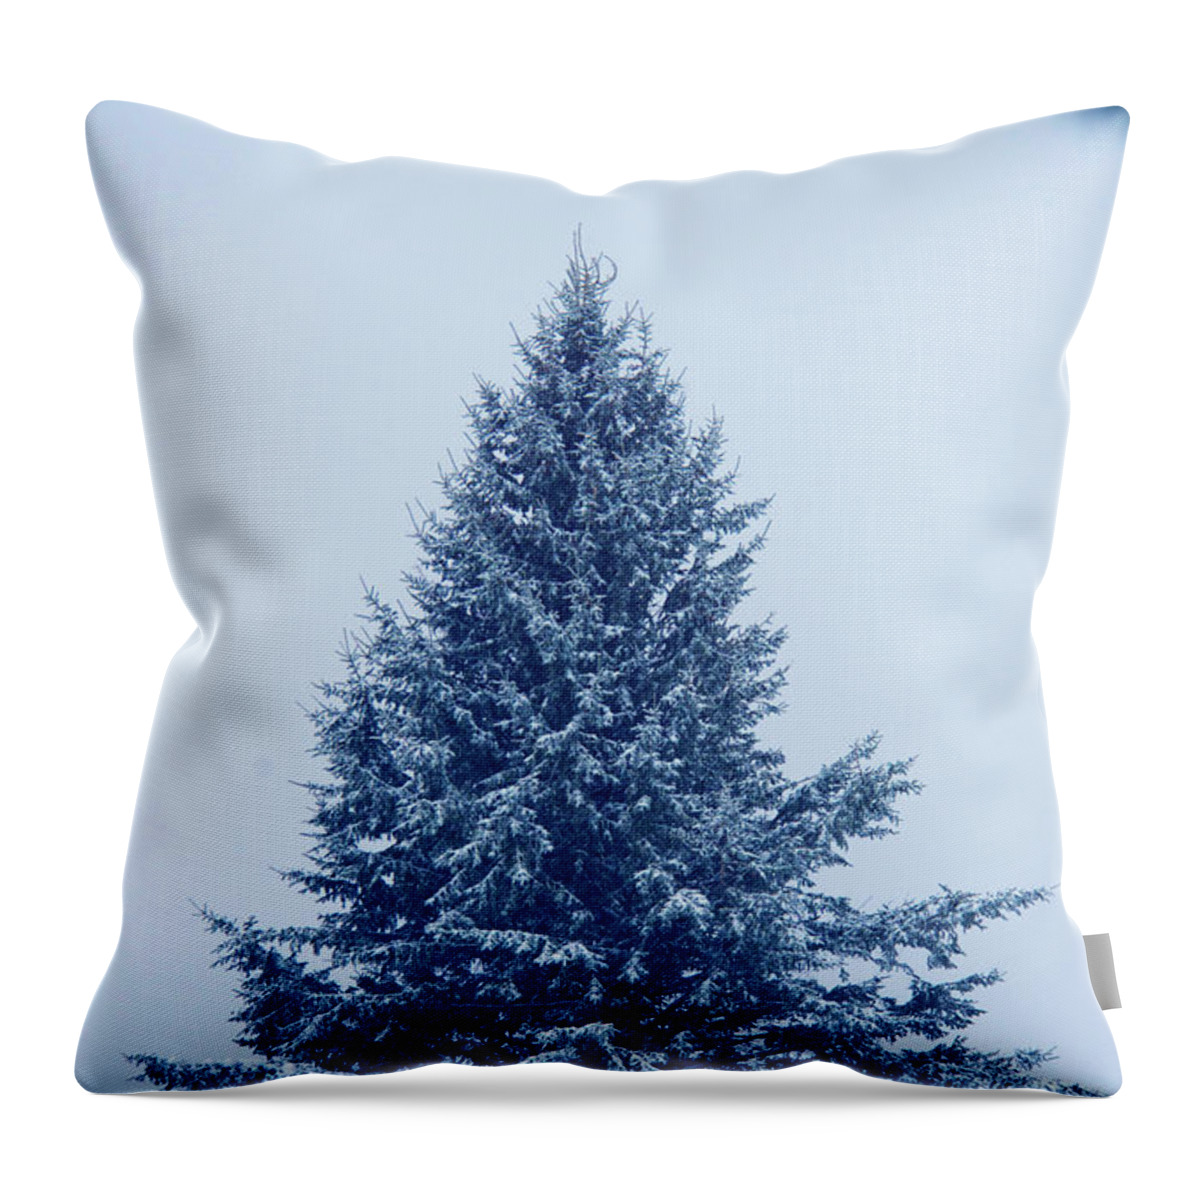 Blue Christmas Throw Pillow featuring the photograph Blue Christmas Tree by Alana Ranney